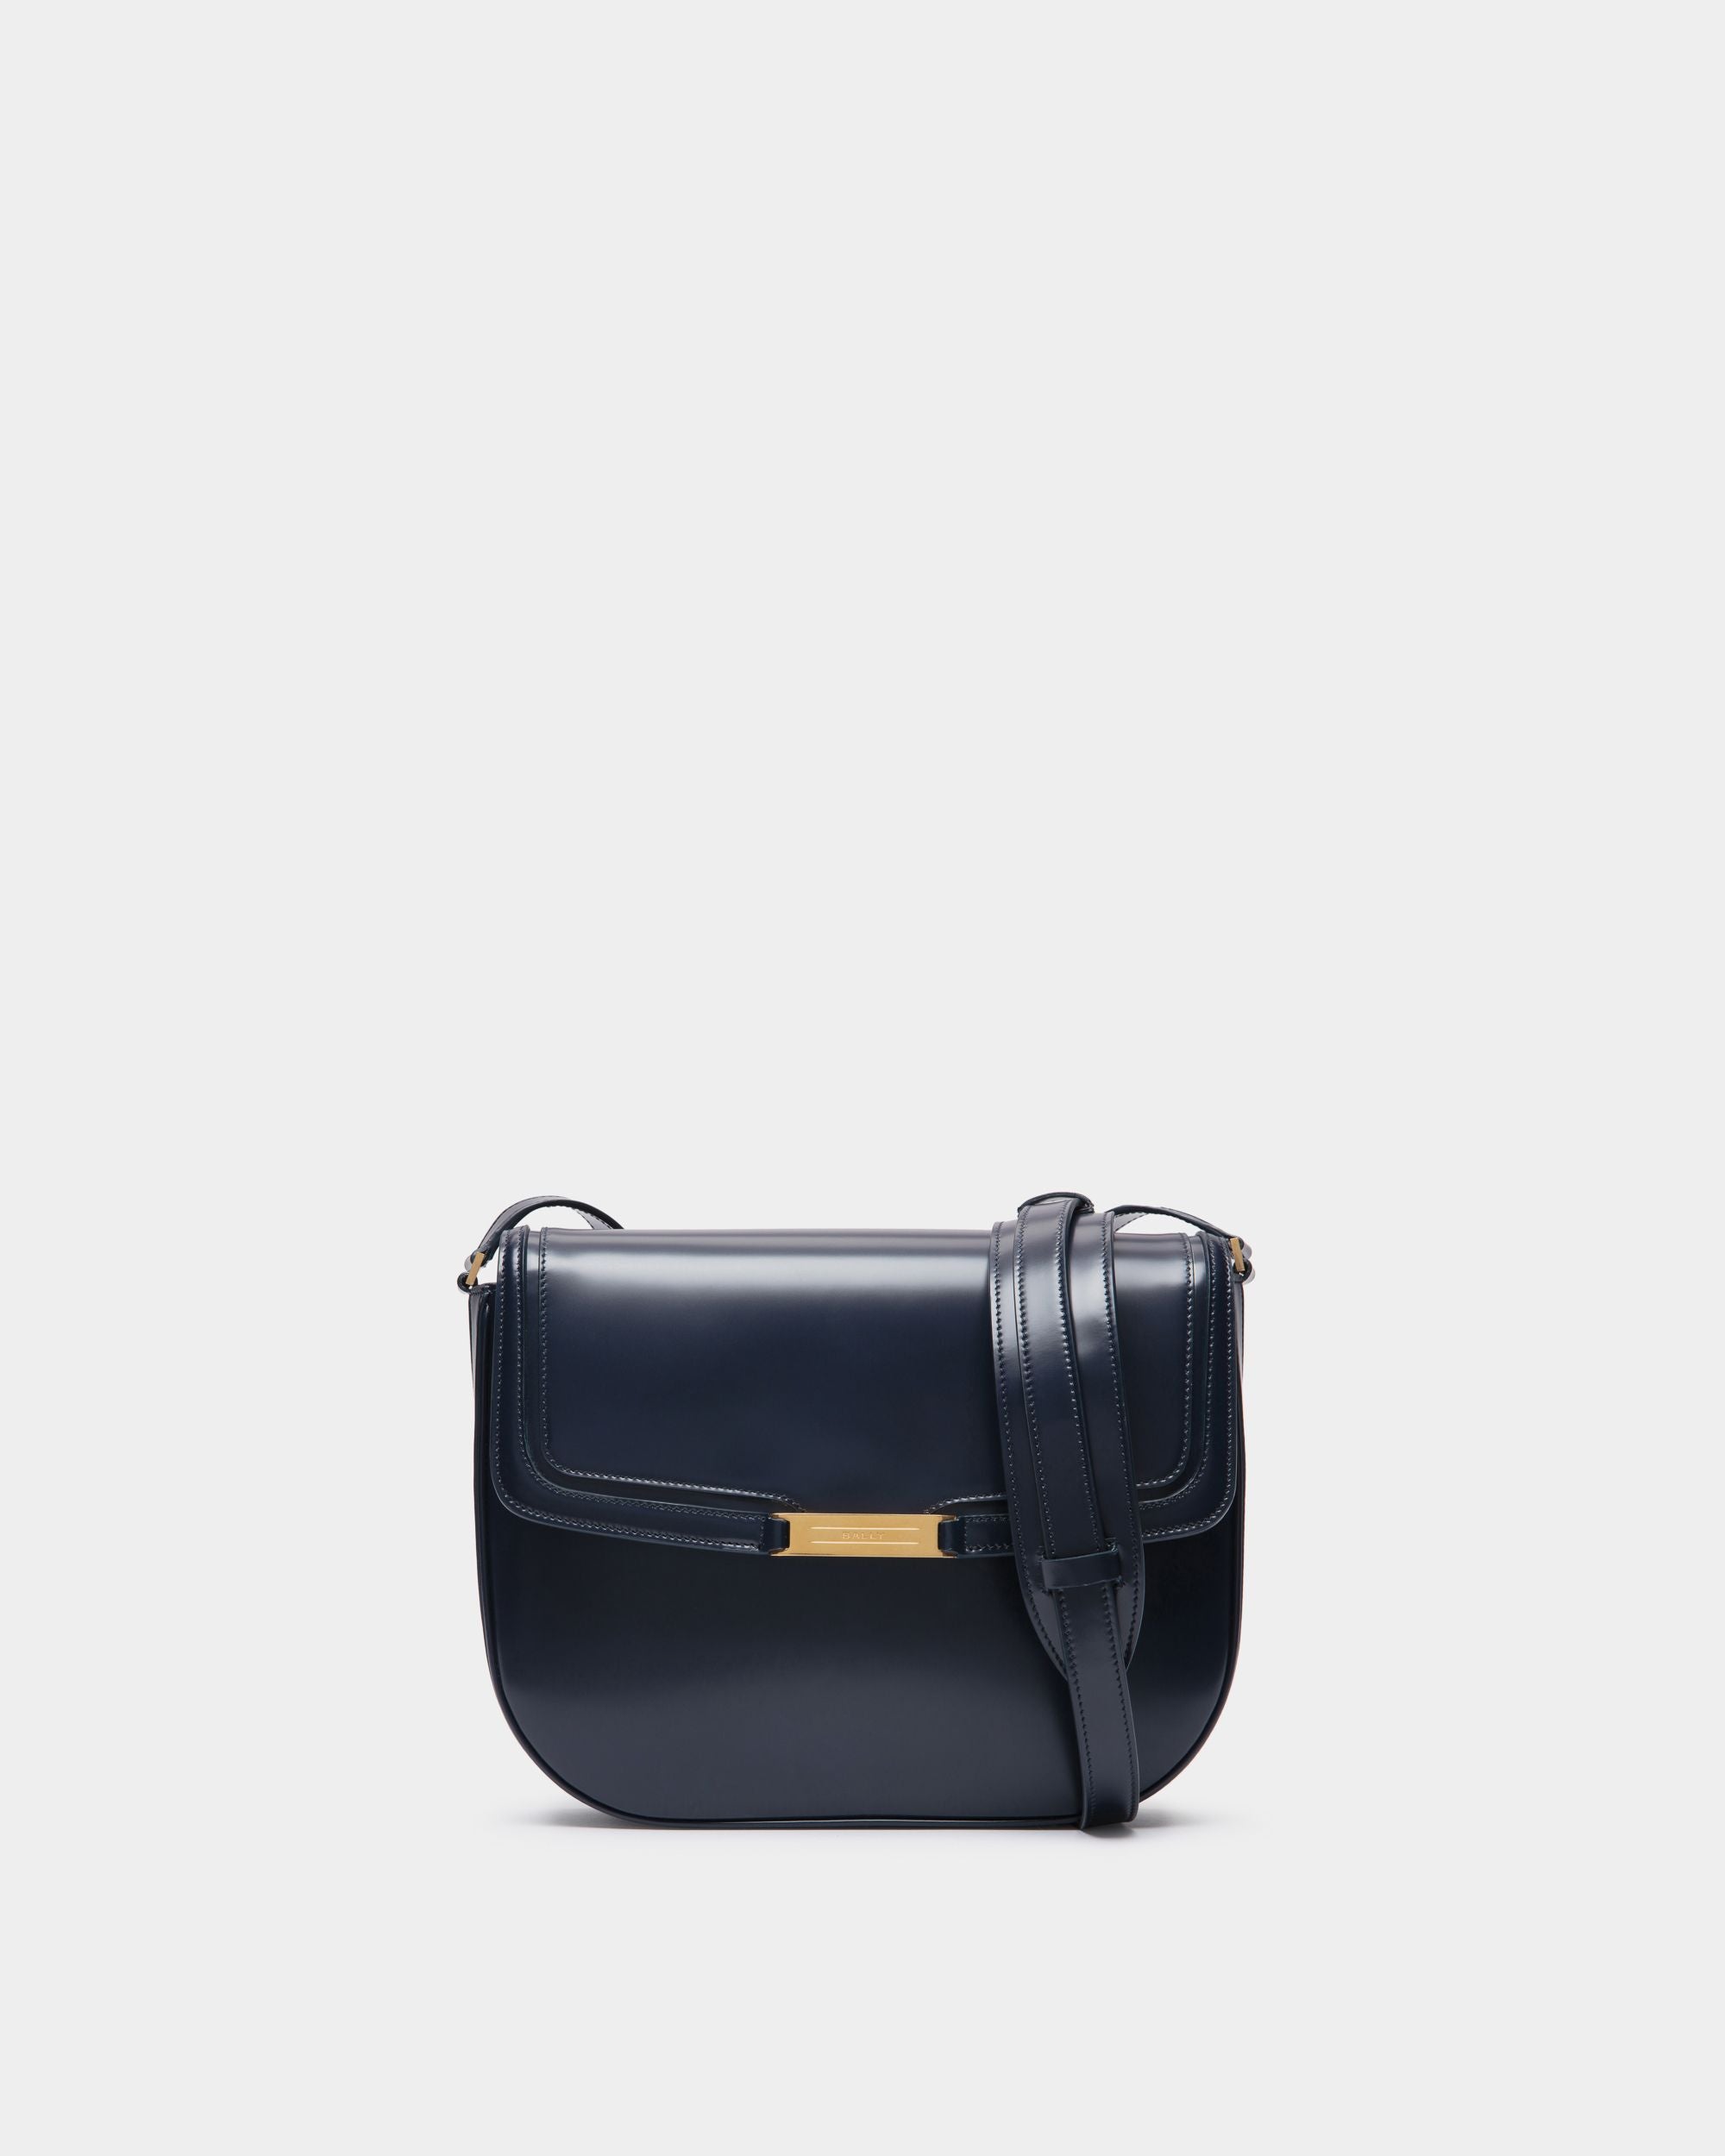 Deco | Men's Crossbody Bag in Navy Blue Brushed Leather | Bally | Still Life Front